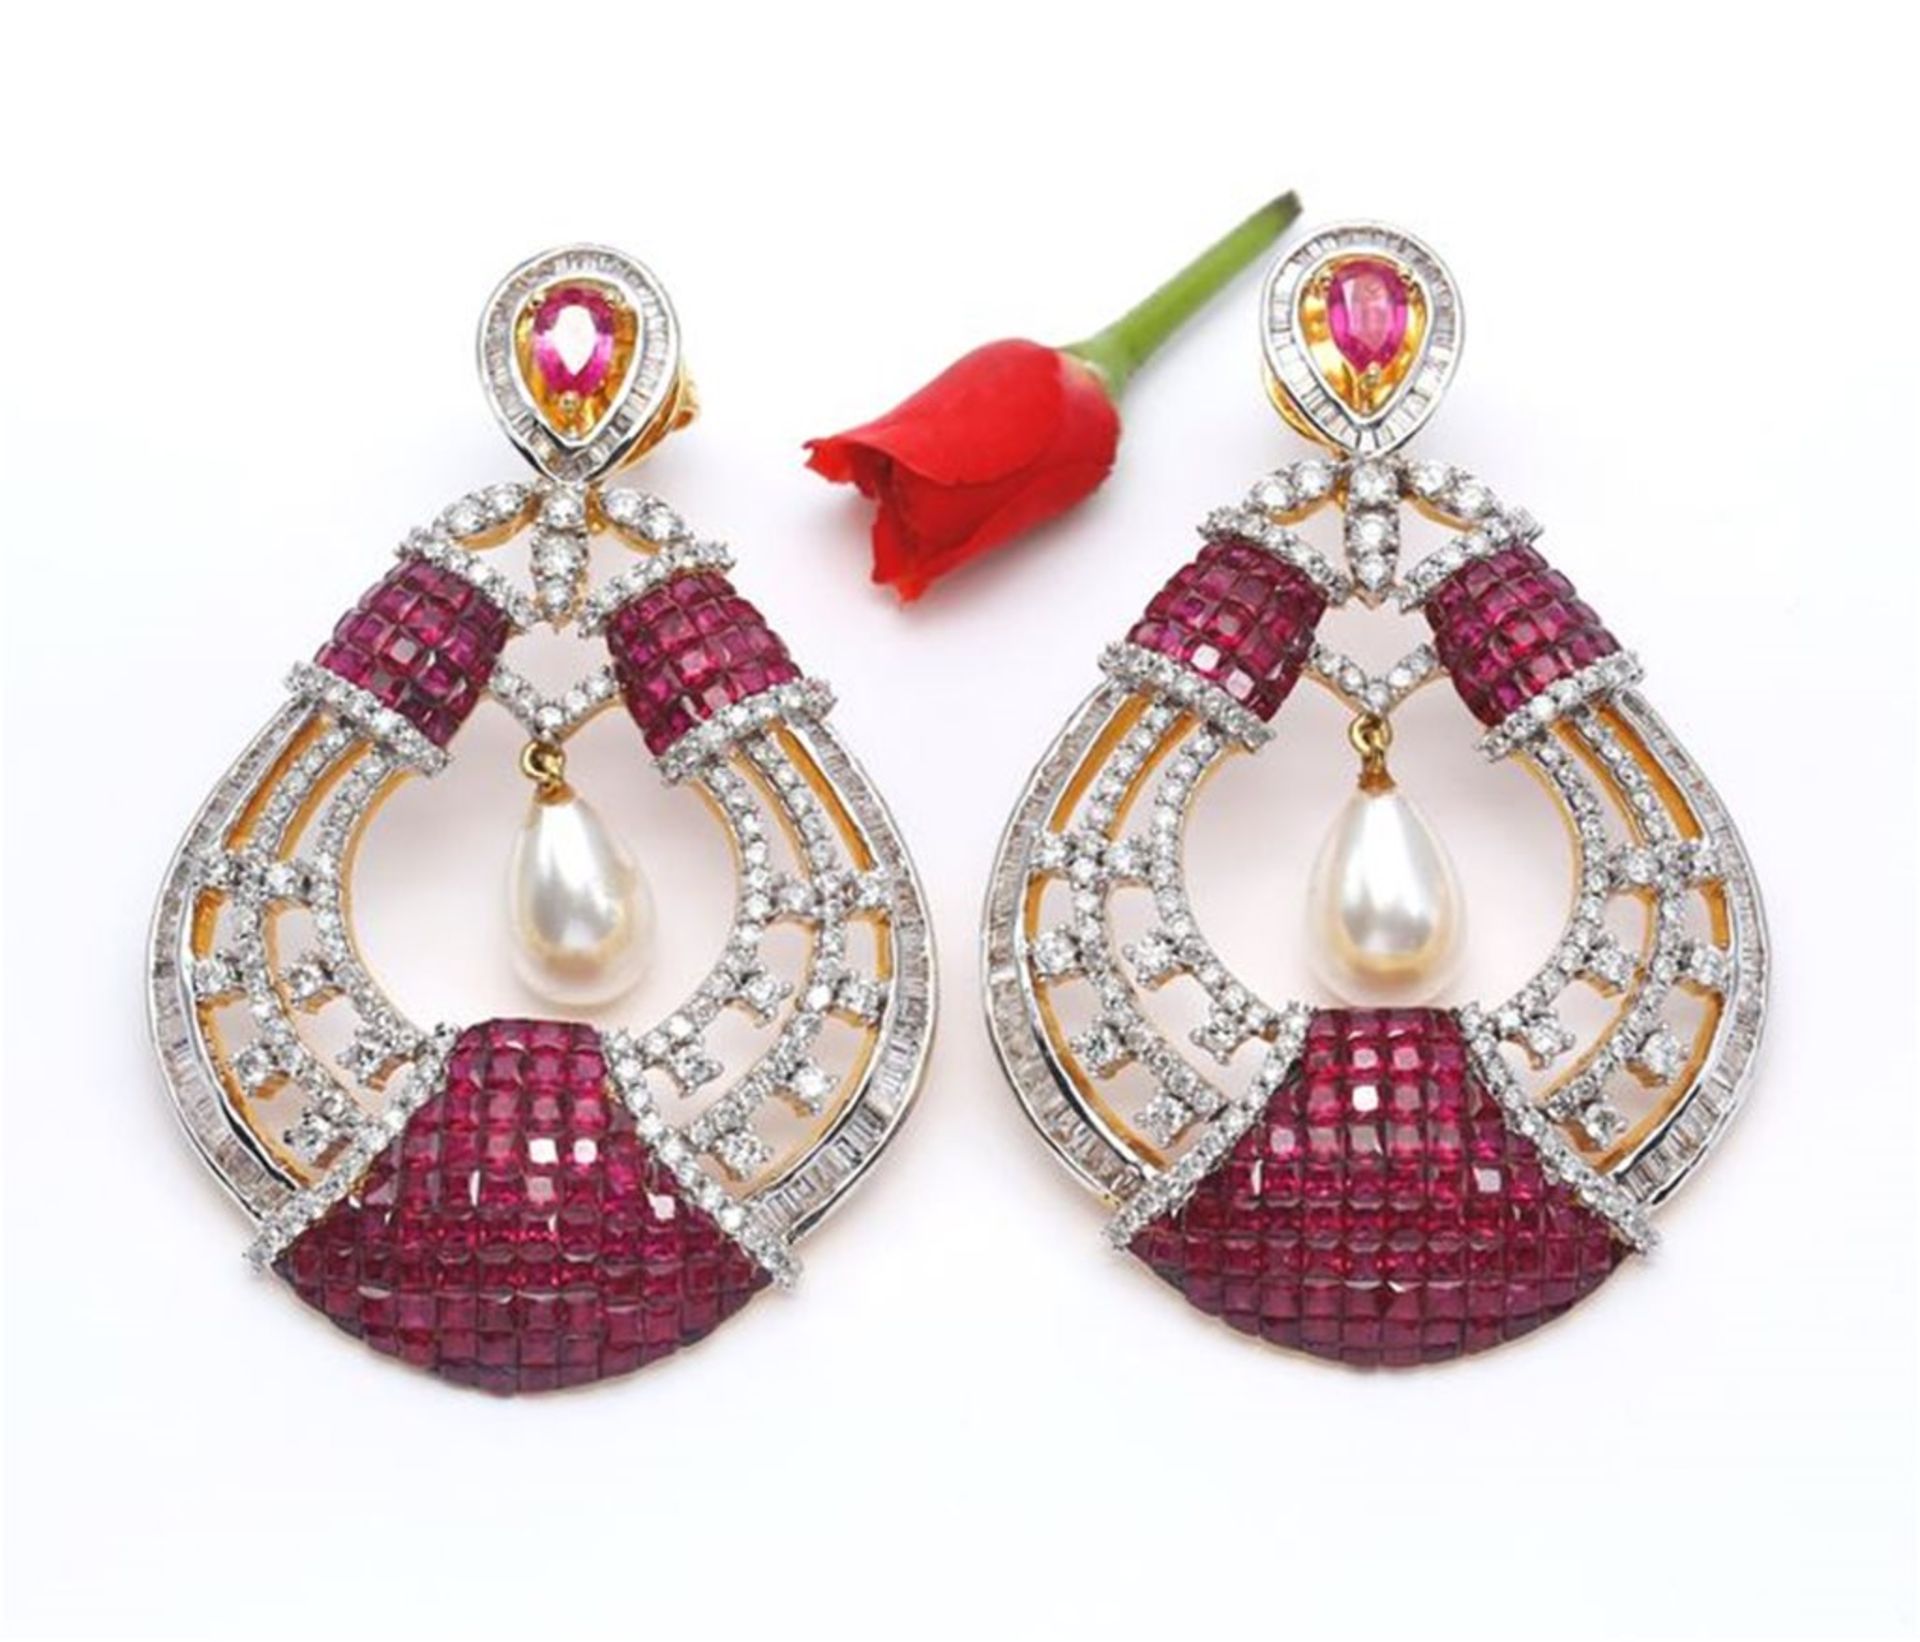 IGI Certified 14 K Yellow Gold Diamond, Ruby & Pearl Necklace Pendant Set with Chandelier Earrings - Image 2 of 9